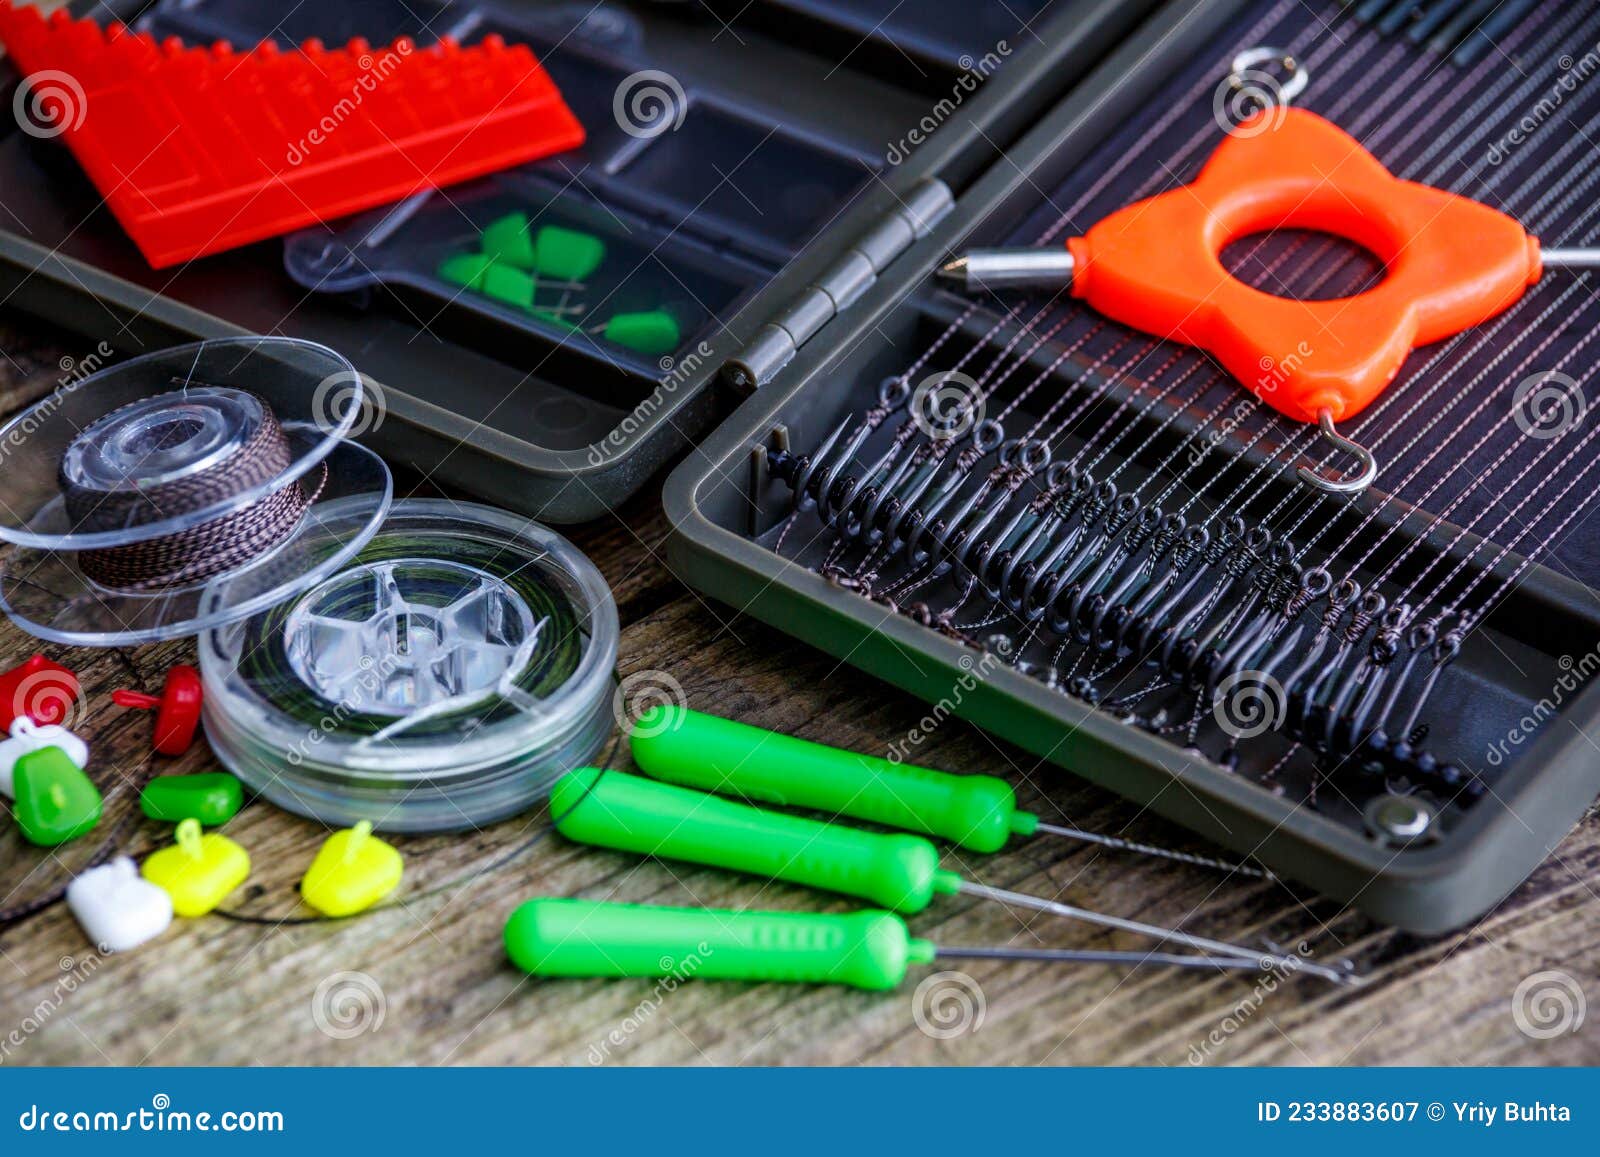 https://thumbs.dreamstime.com/z/fishing-adventures-carp-large-fisherman-s-tackle-box-fully-stocked-lures-gear-installation-big-fish-233883607.jpg